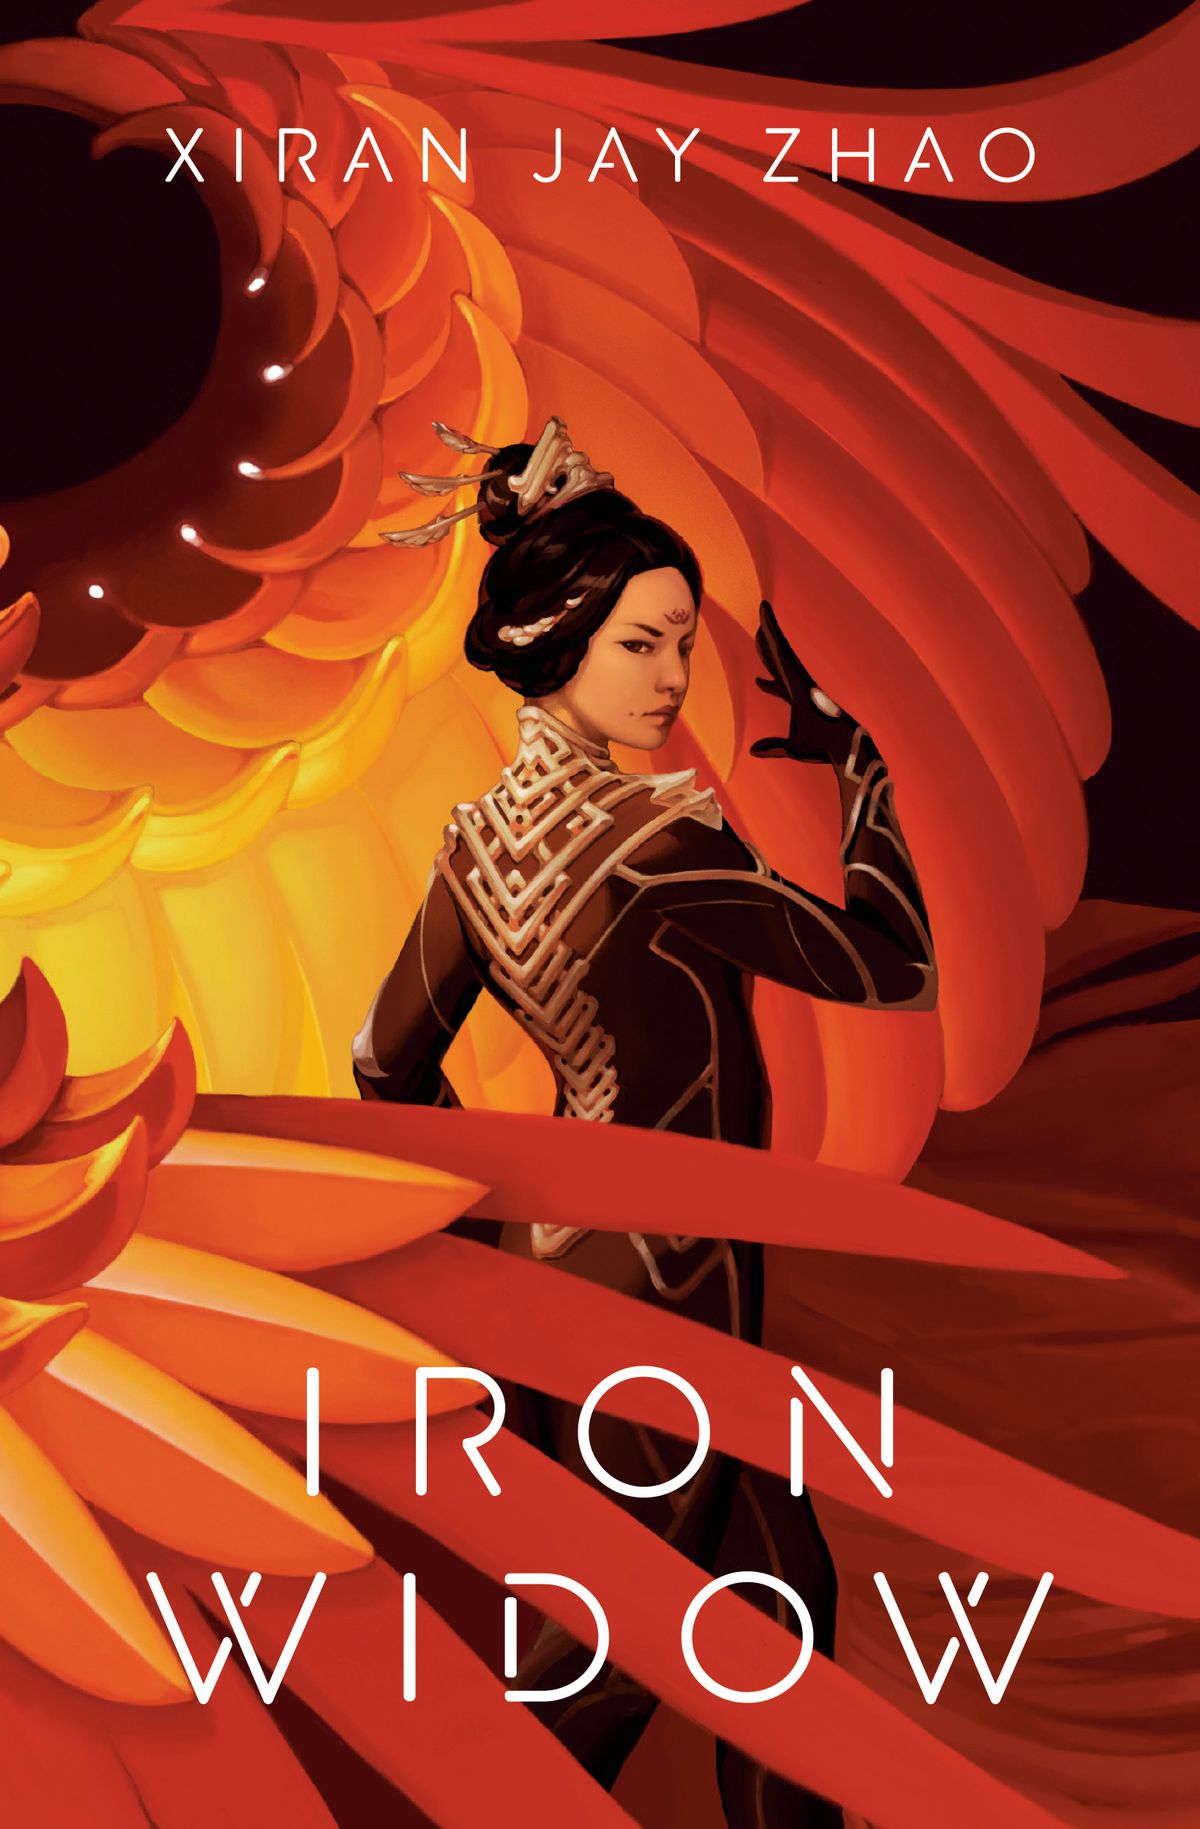 The cover for “Iron Widow” by Xiran Jay Zhao showing an Asian woman with giant bird wings wrapping around her